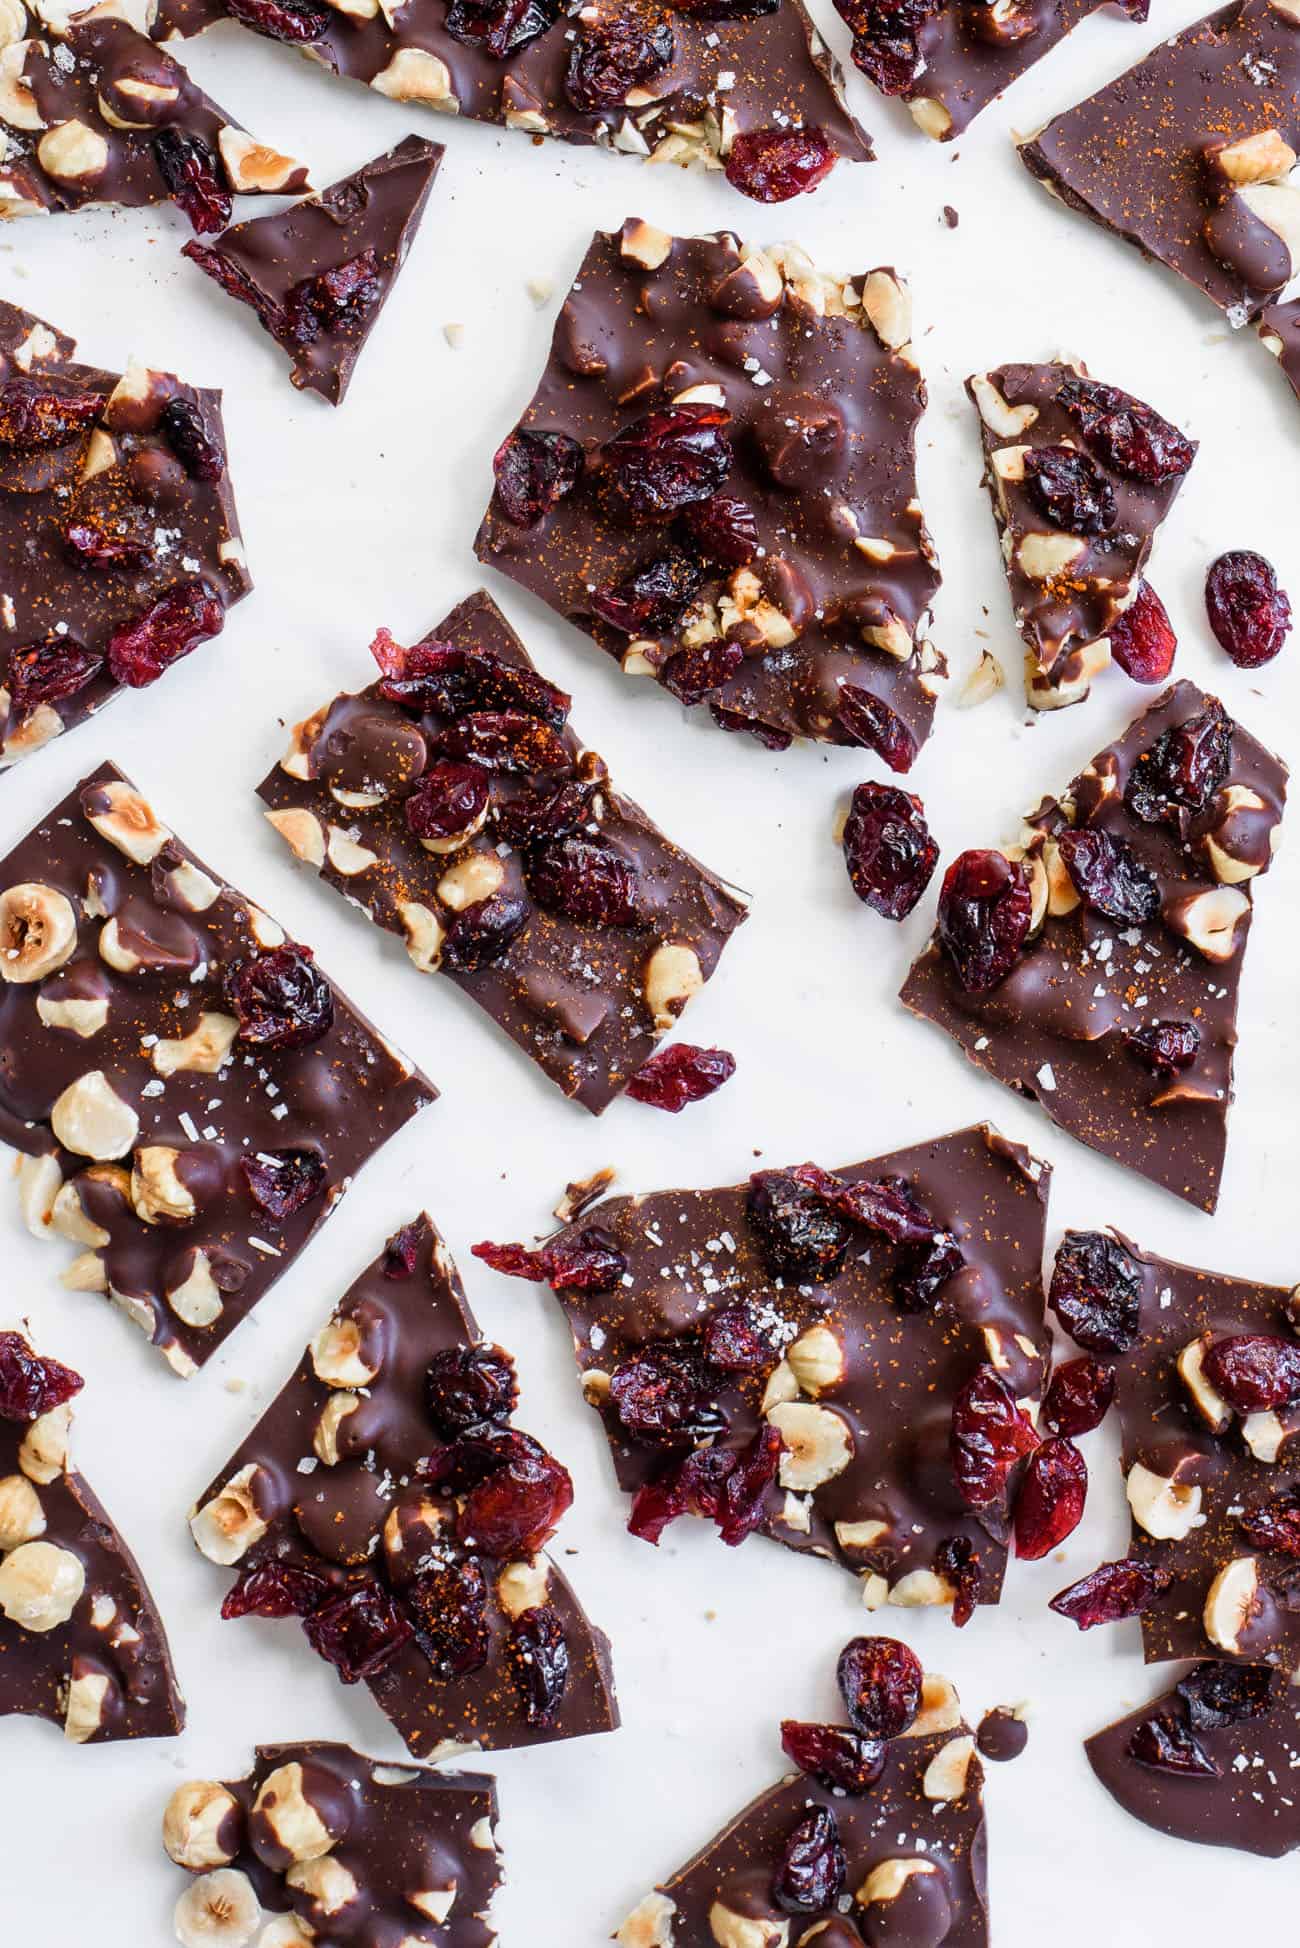 Shards of dark chocolate bark with cranberries on parchment paper